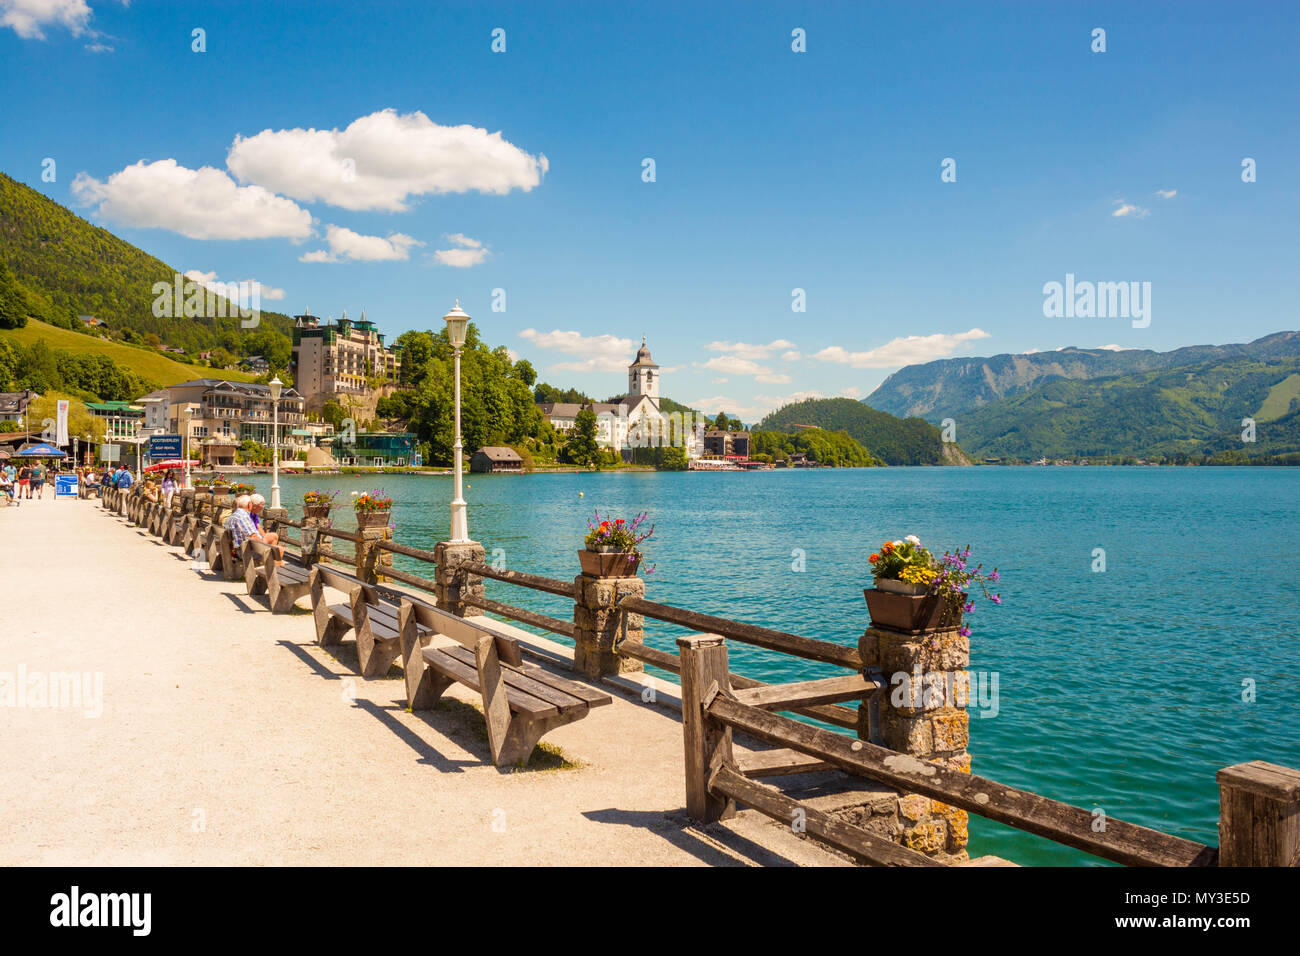 St. Wolfgang, Austria - May 27, 2017: Waterfront promenade on alpine lake Wolfgangsee with a row of wooden benches. View of St.Wolfgang church  and mo Stock Photo